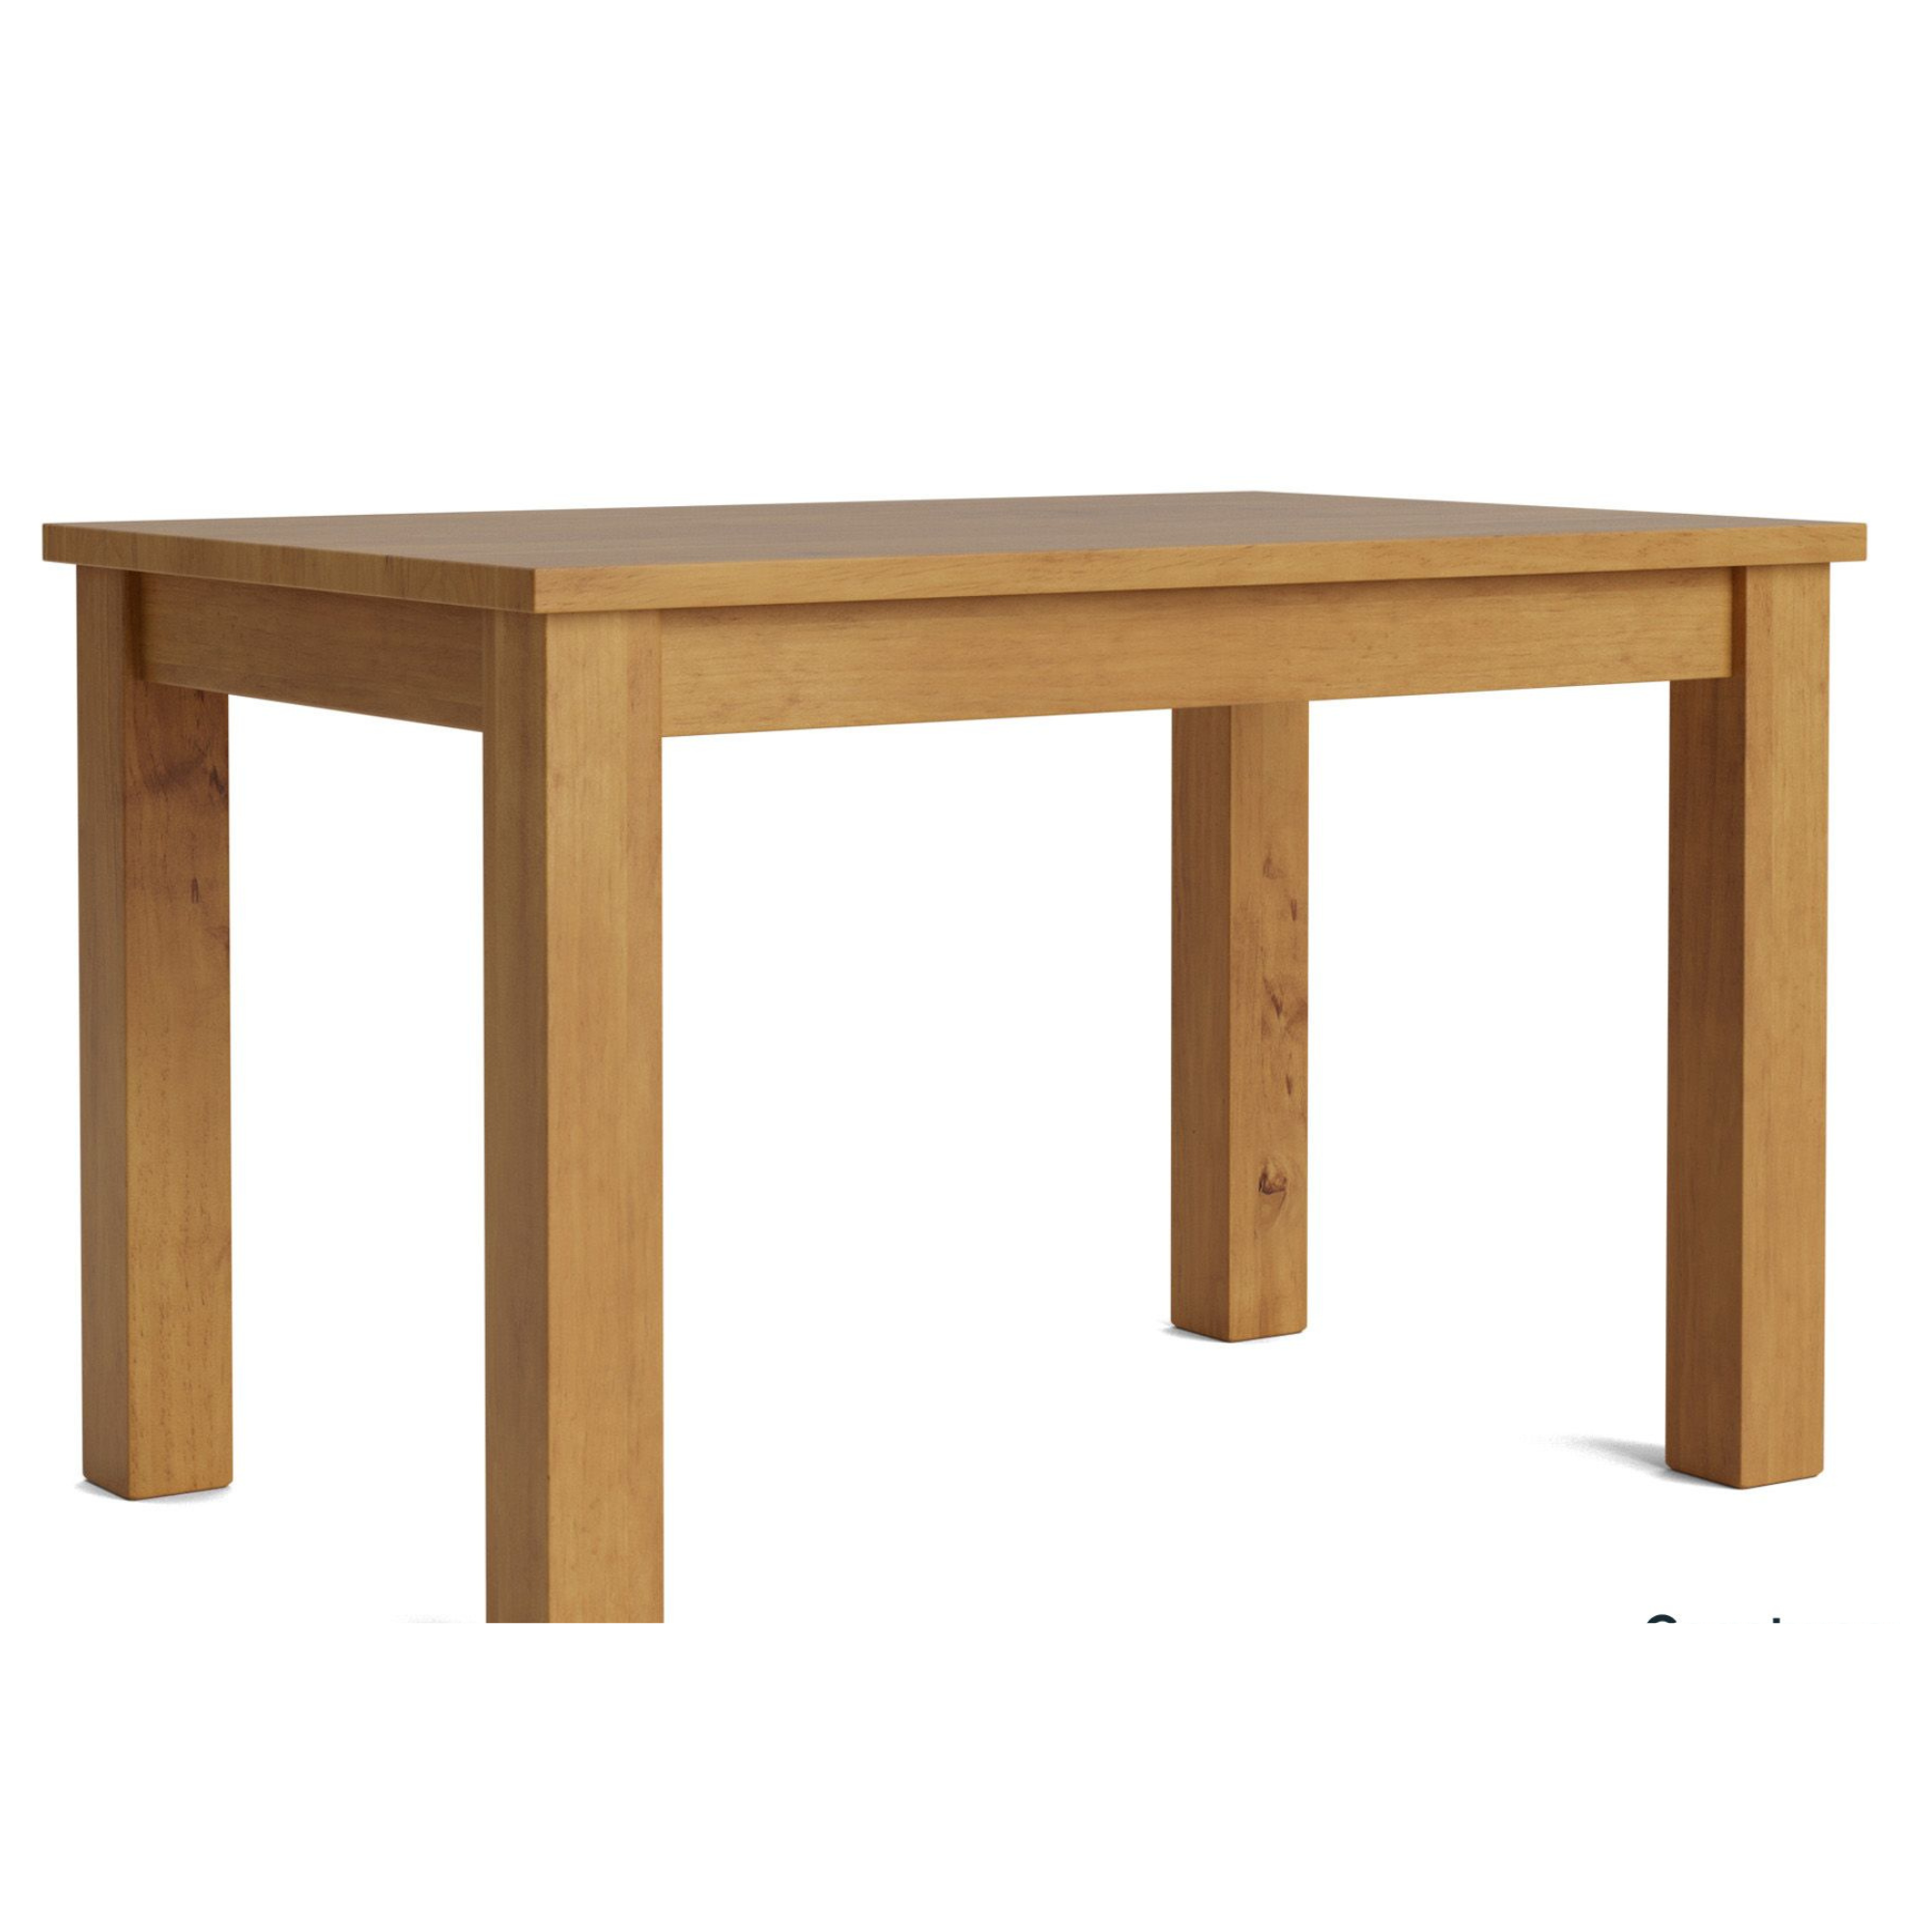 CHARLTON 1200 DINING TABLE | NZ MADE